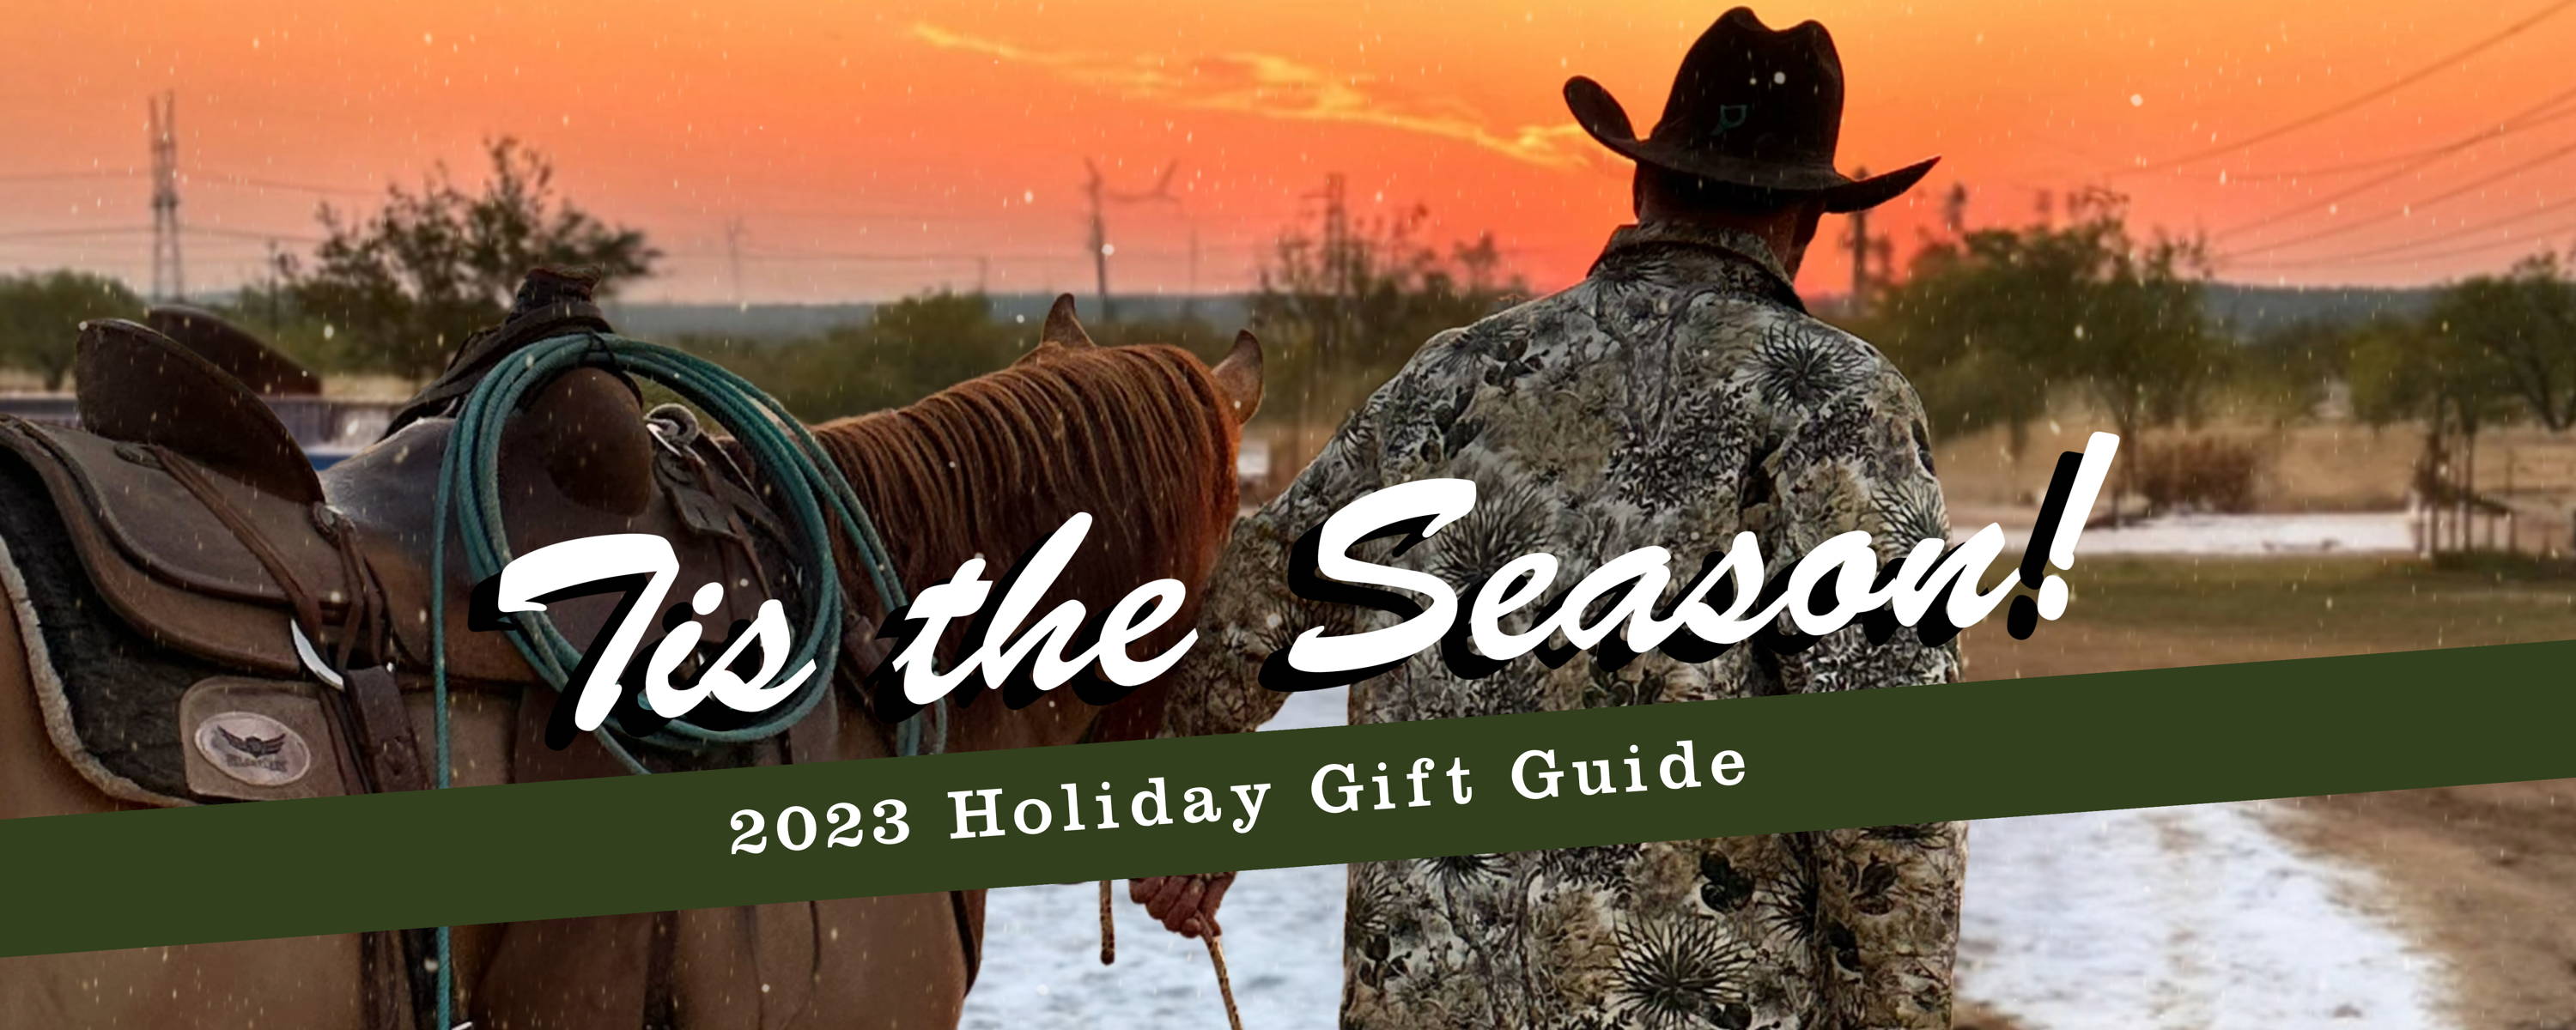 Tis the season! 2023 Holiday Gift Guide. Cowboy walking horse in snow.